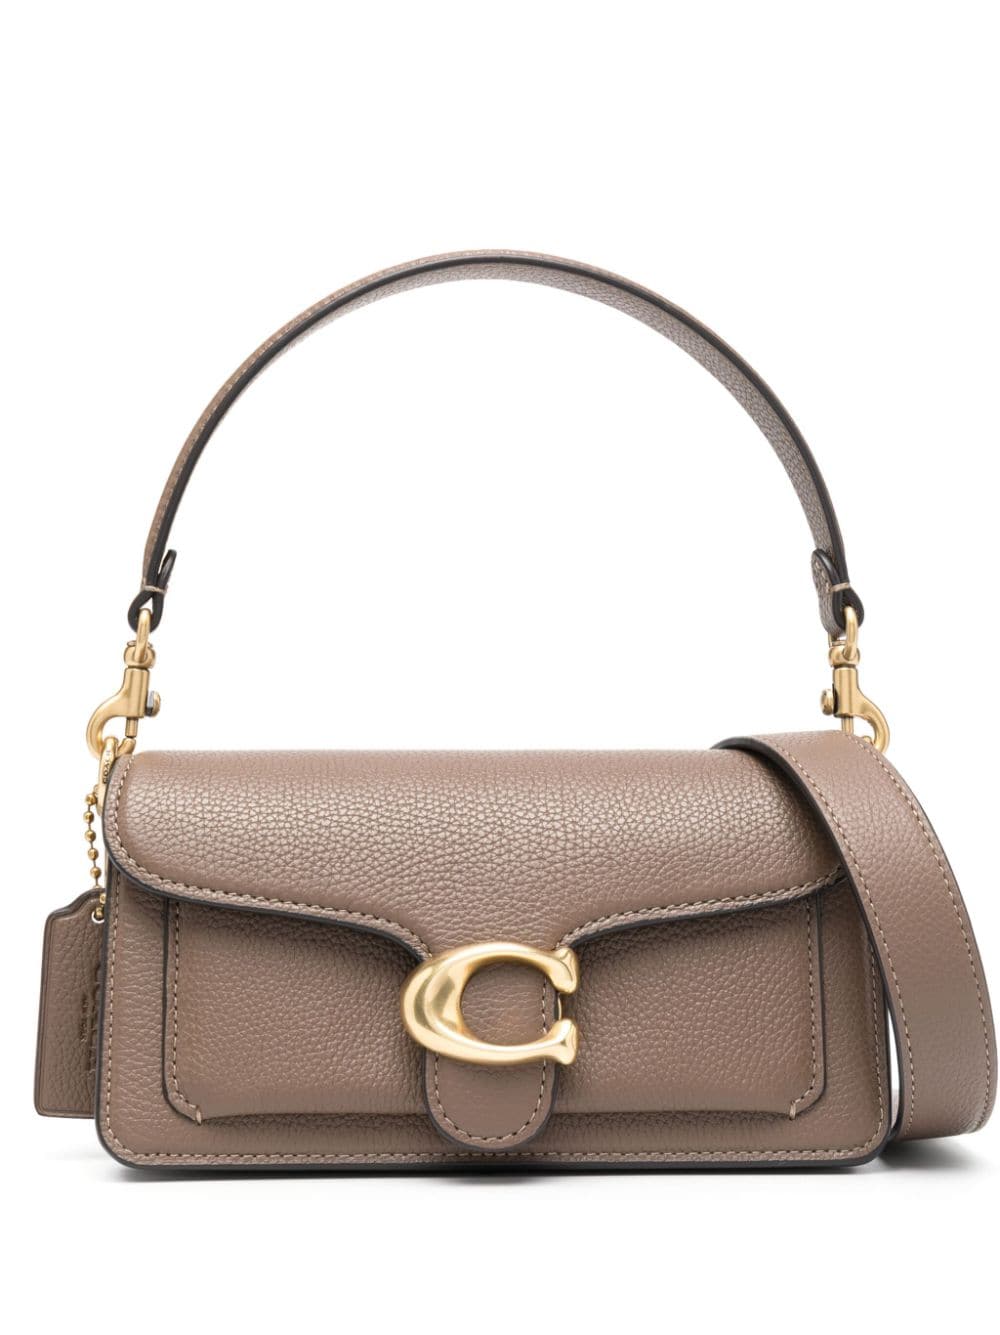 Coach Tabby pebbled-leather tote bag - Brown von Coach